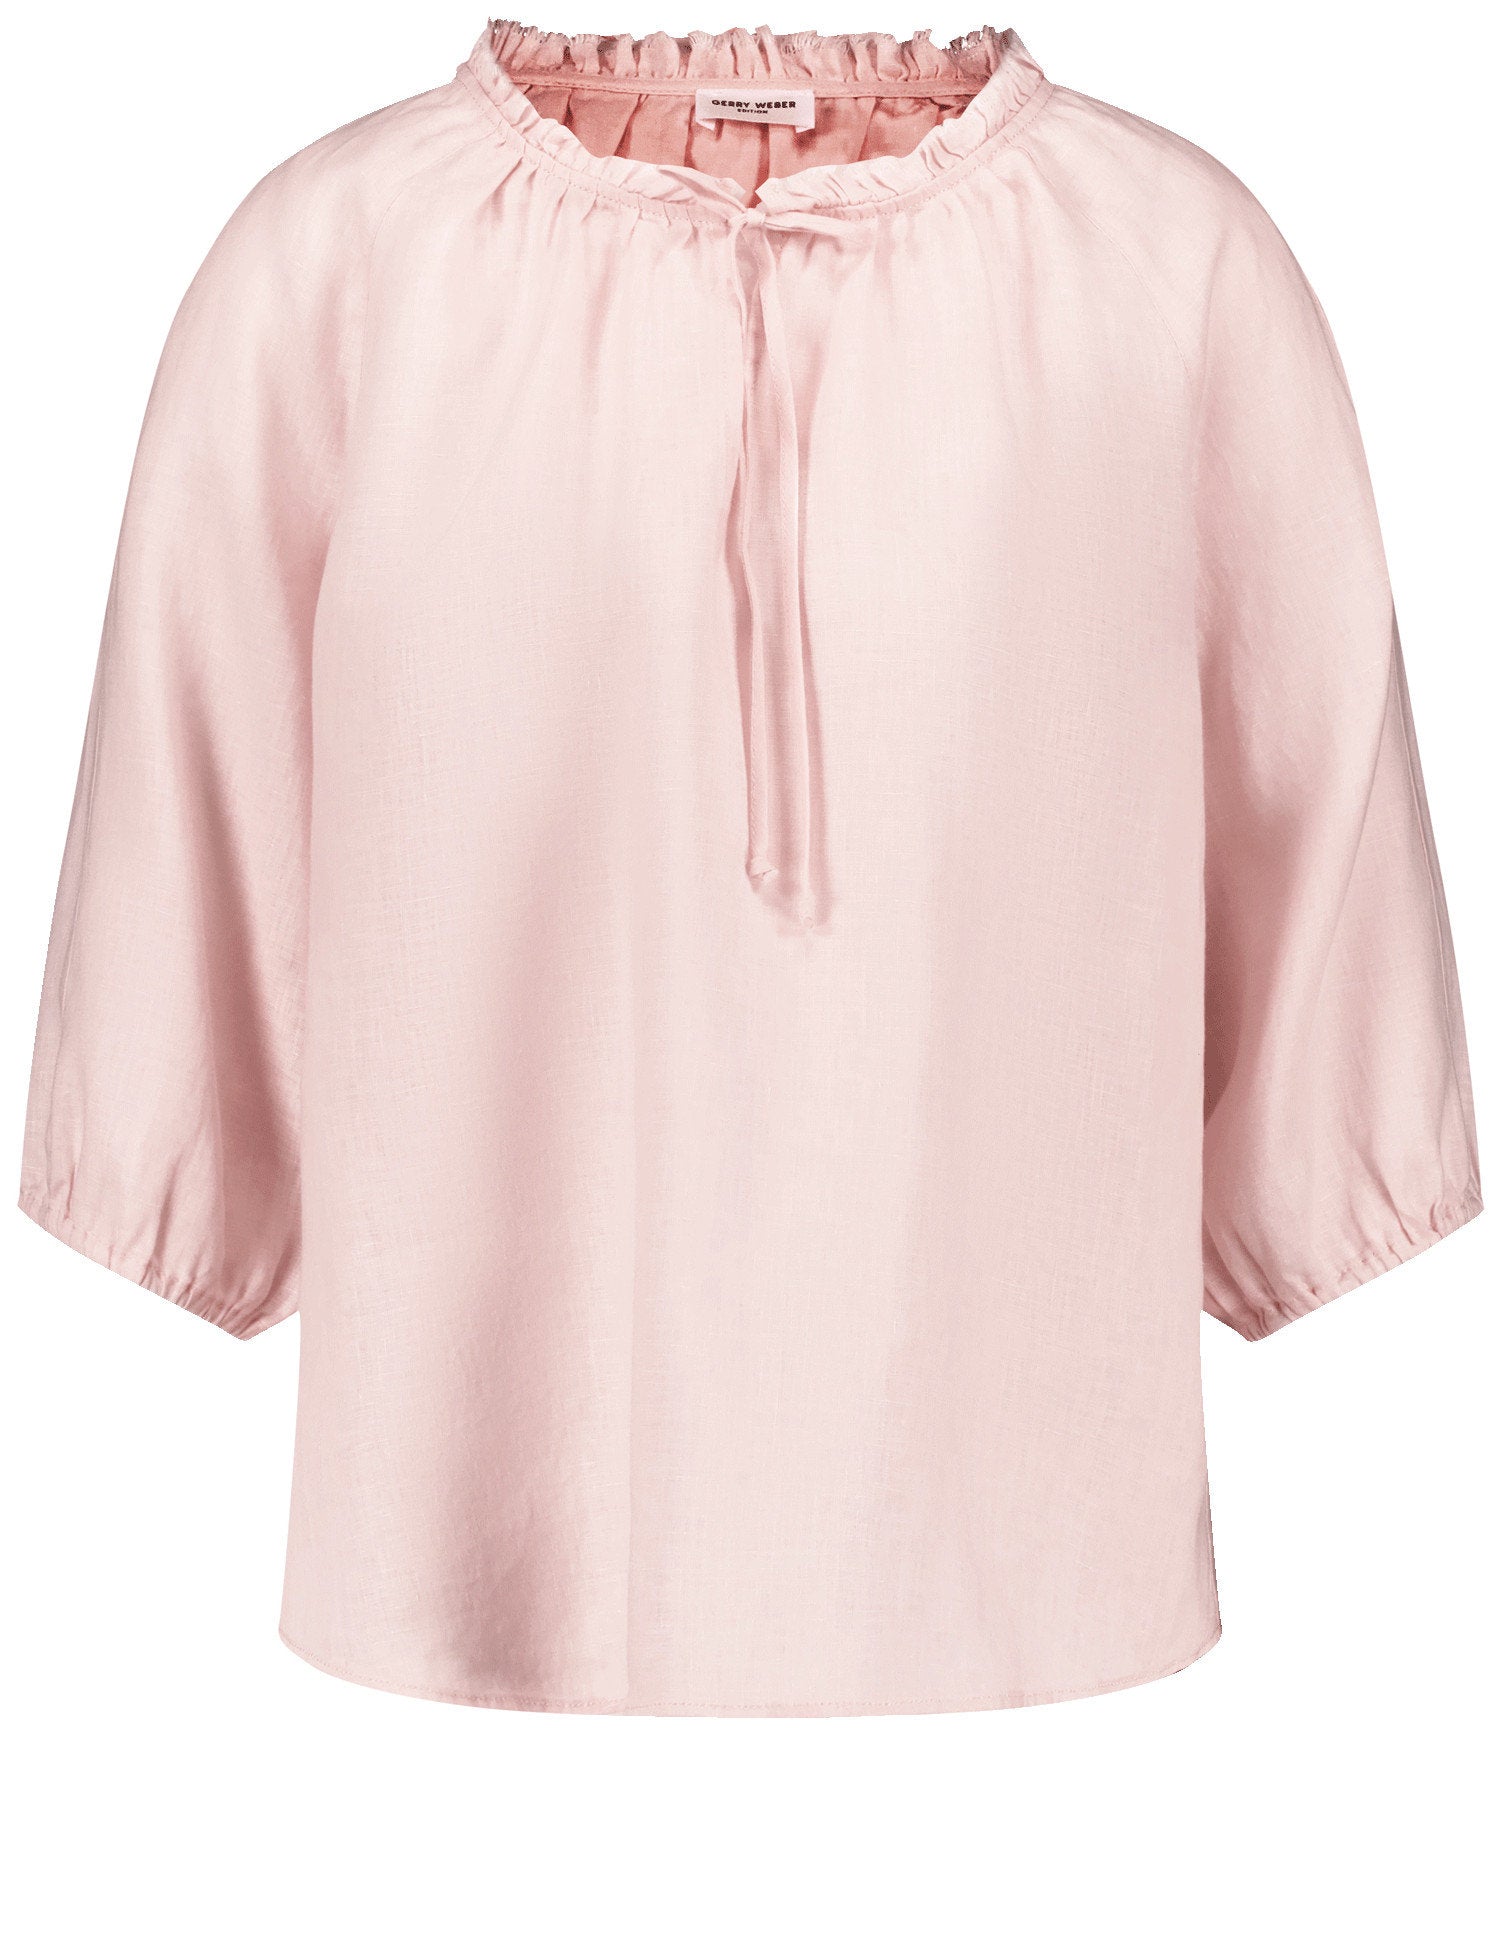 Blouse With 3/4-Length Sleeves And A Frilled Collar_260020-66435_30915_07